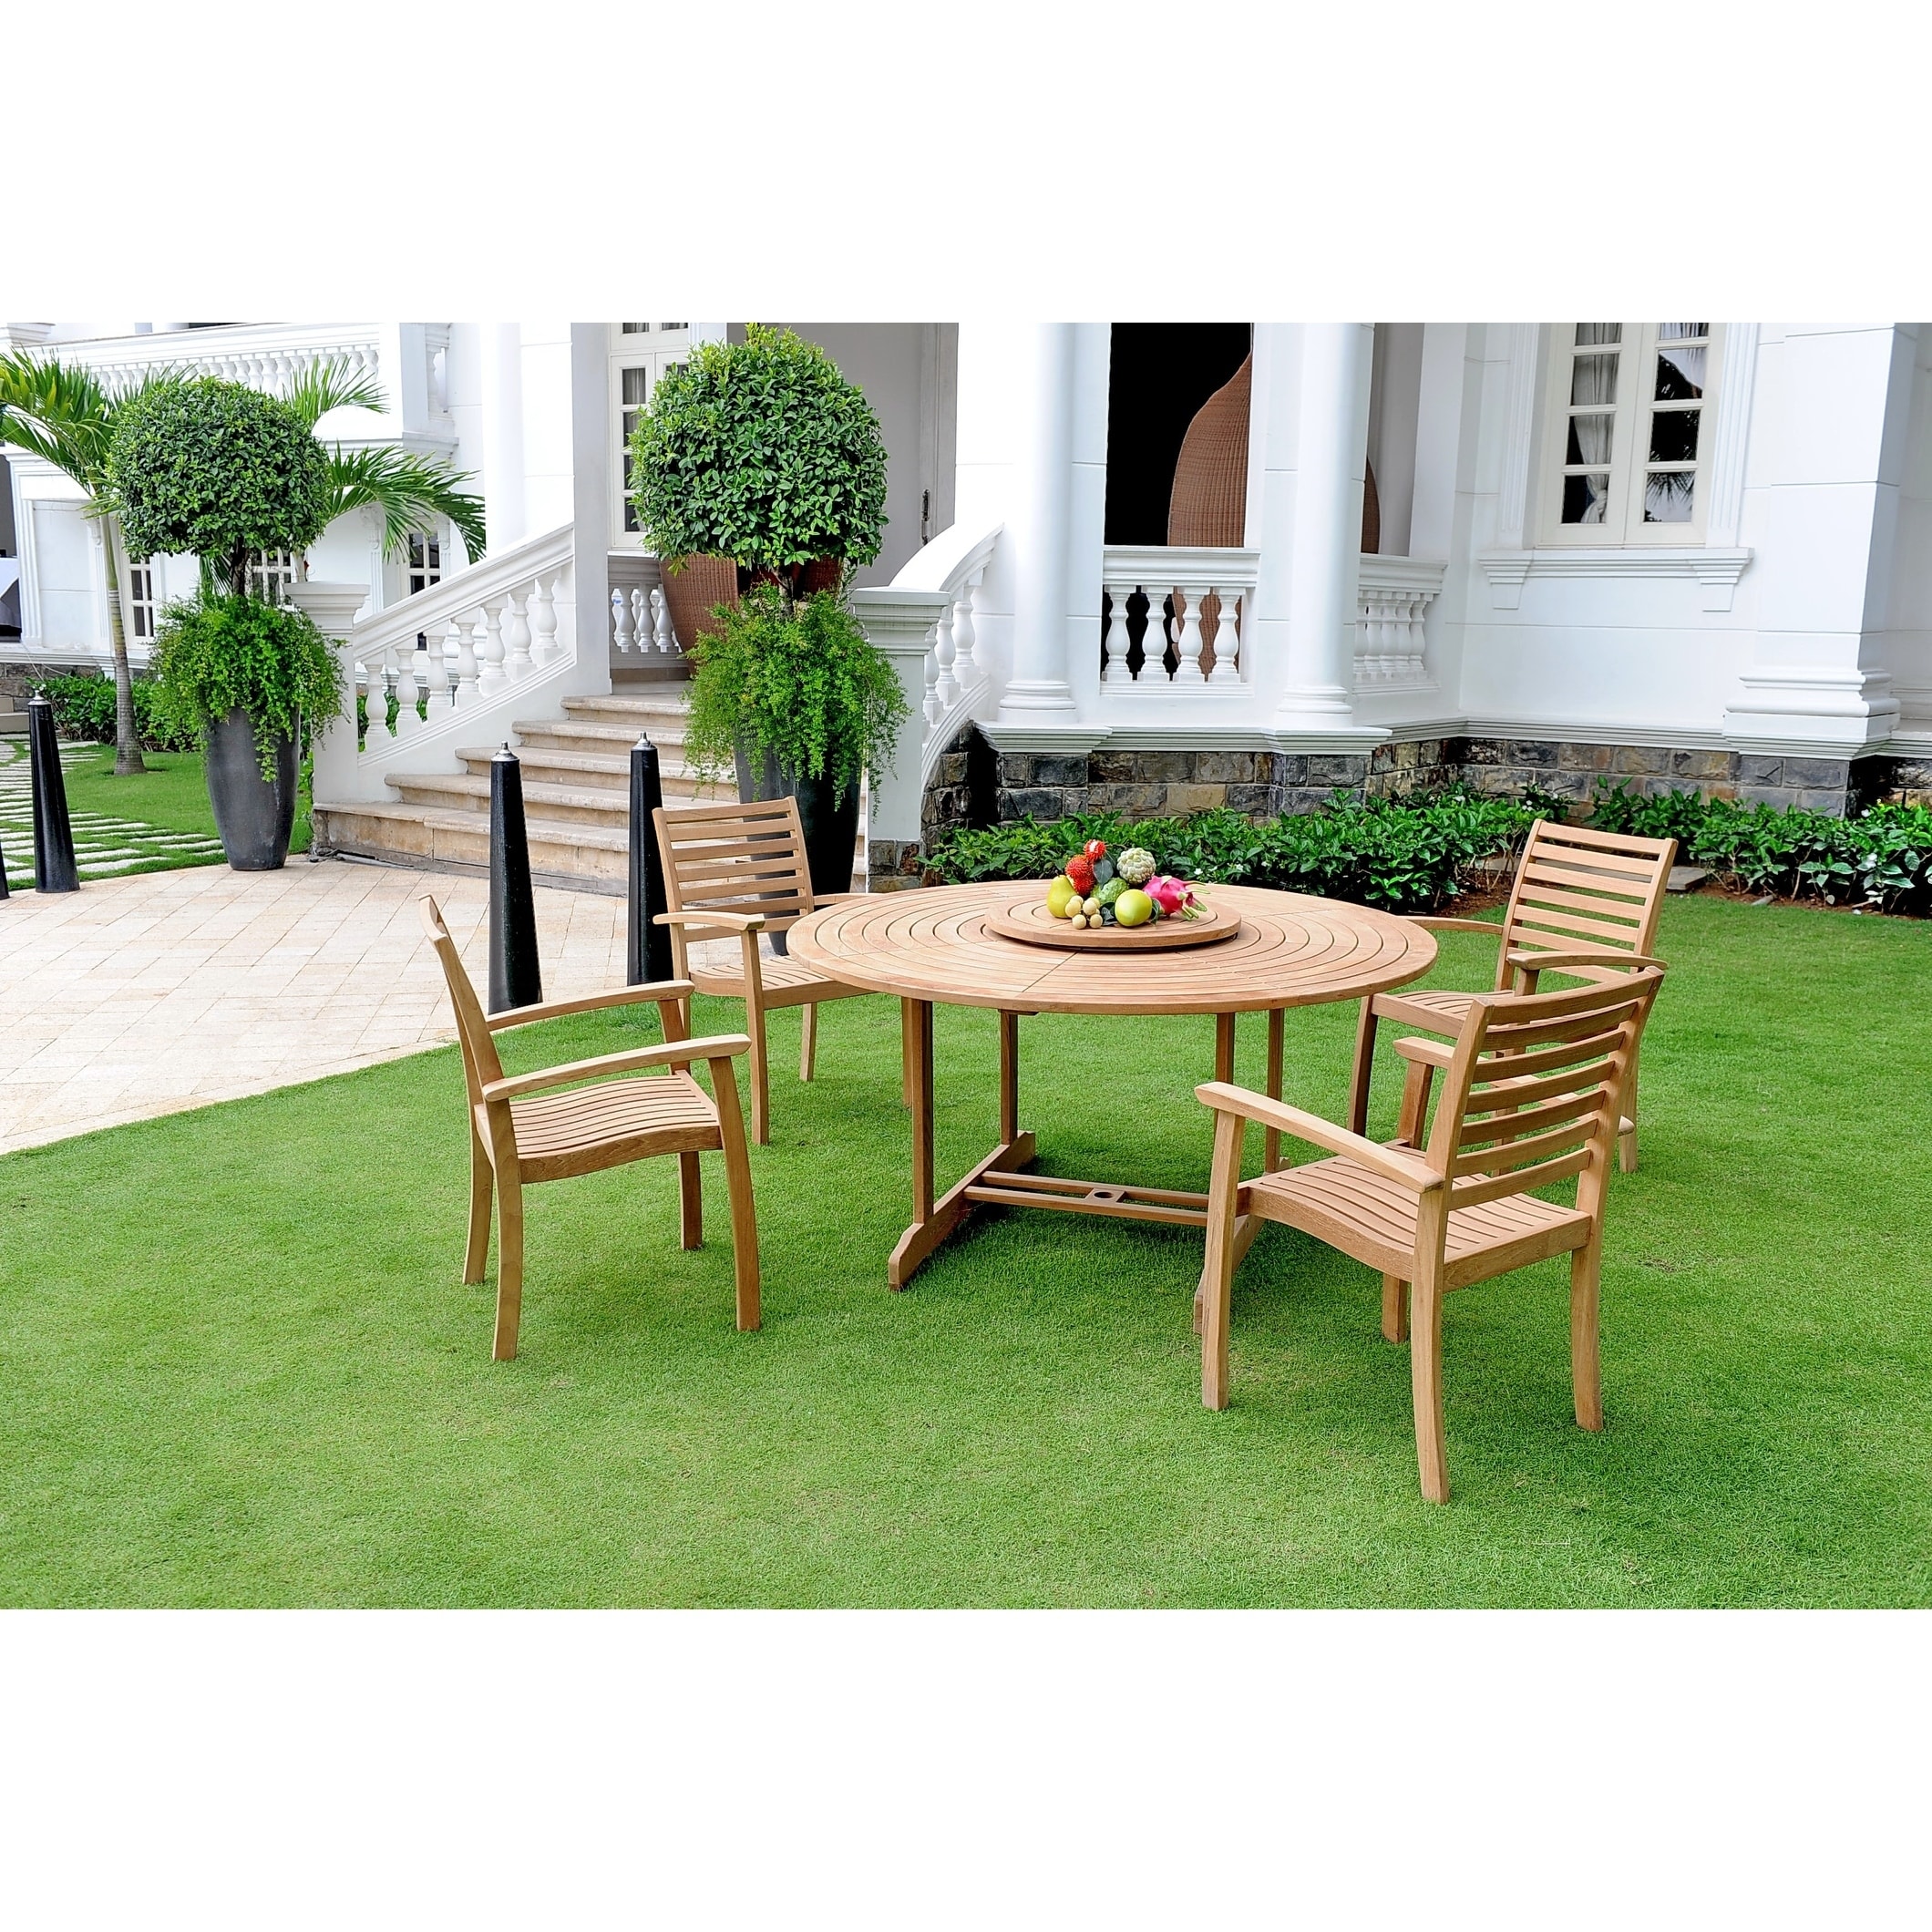 HiTeak Furniture Royal 59" Round Teak Wooden Patio Dining Table with Lazy Susan - image 3 of 3